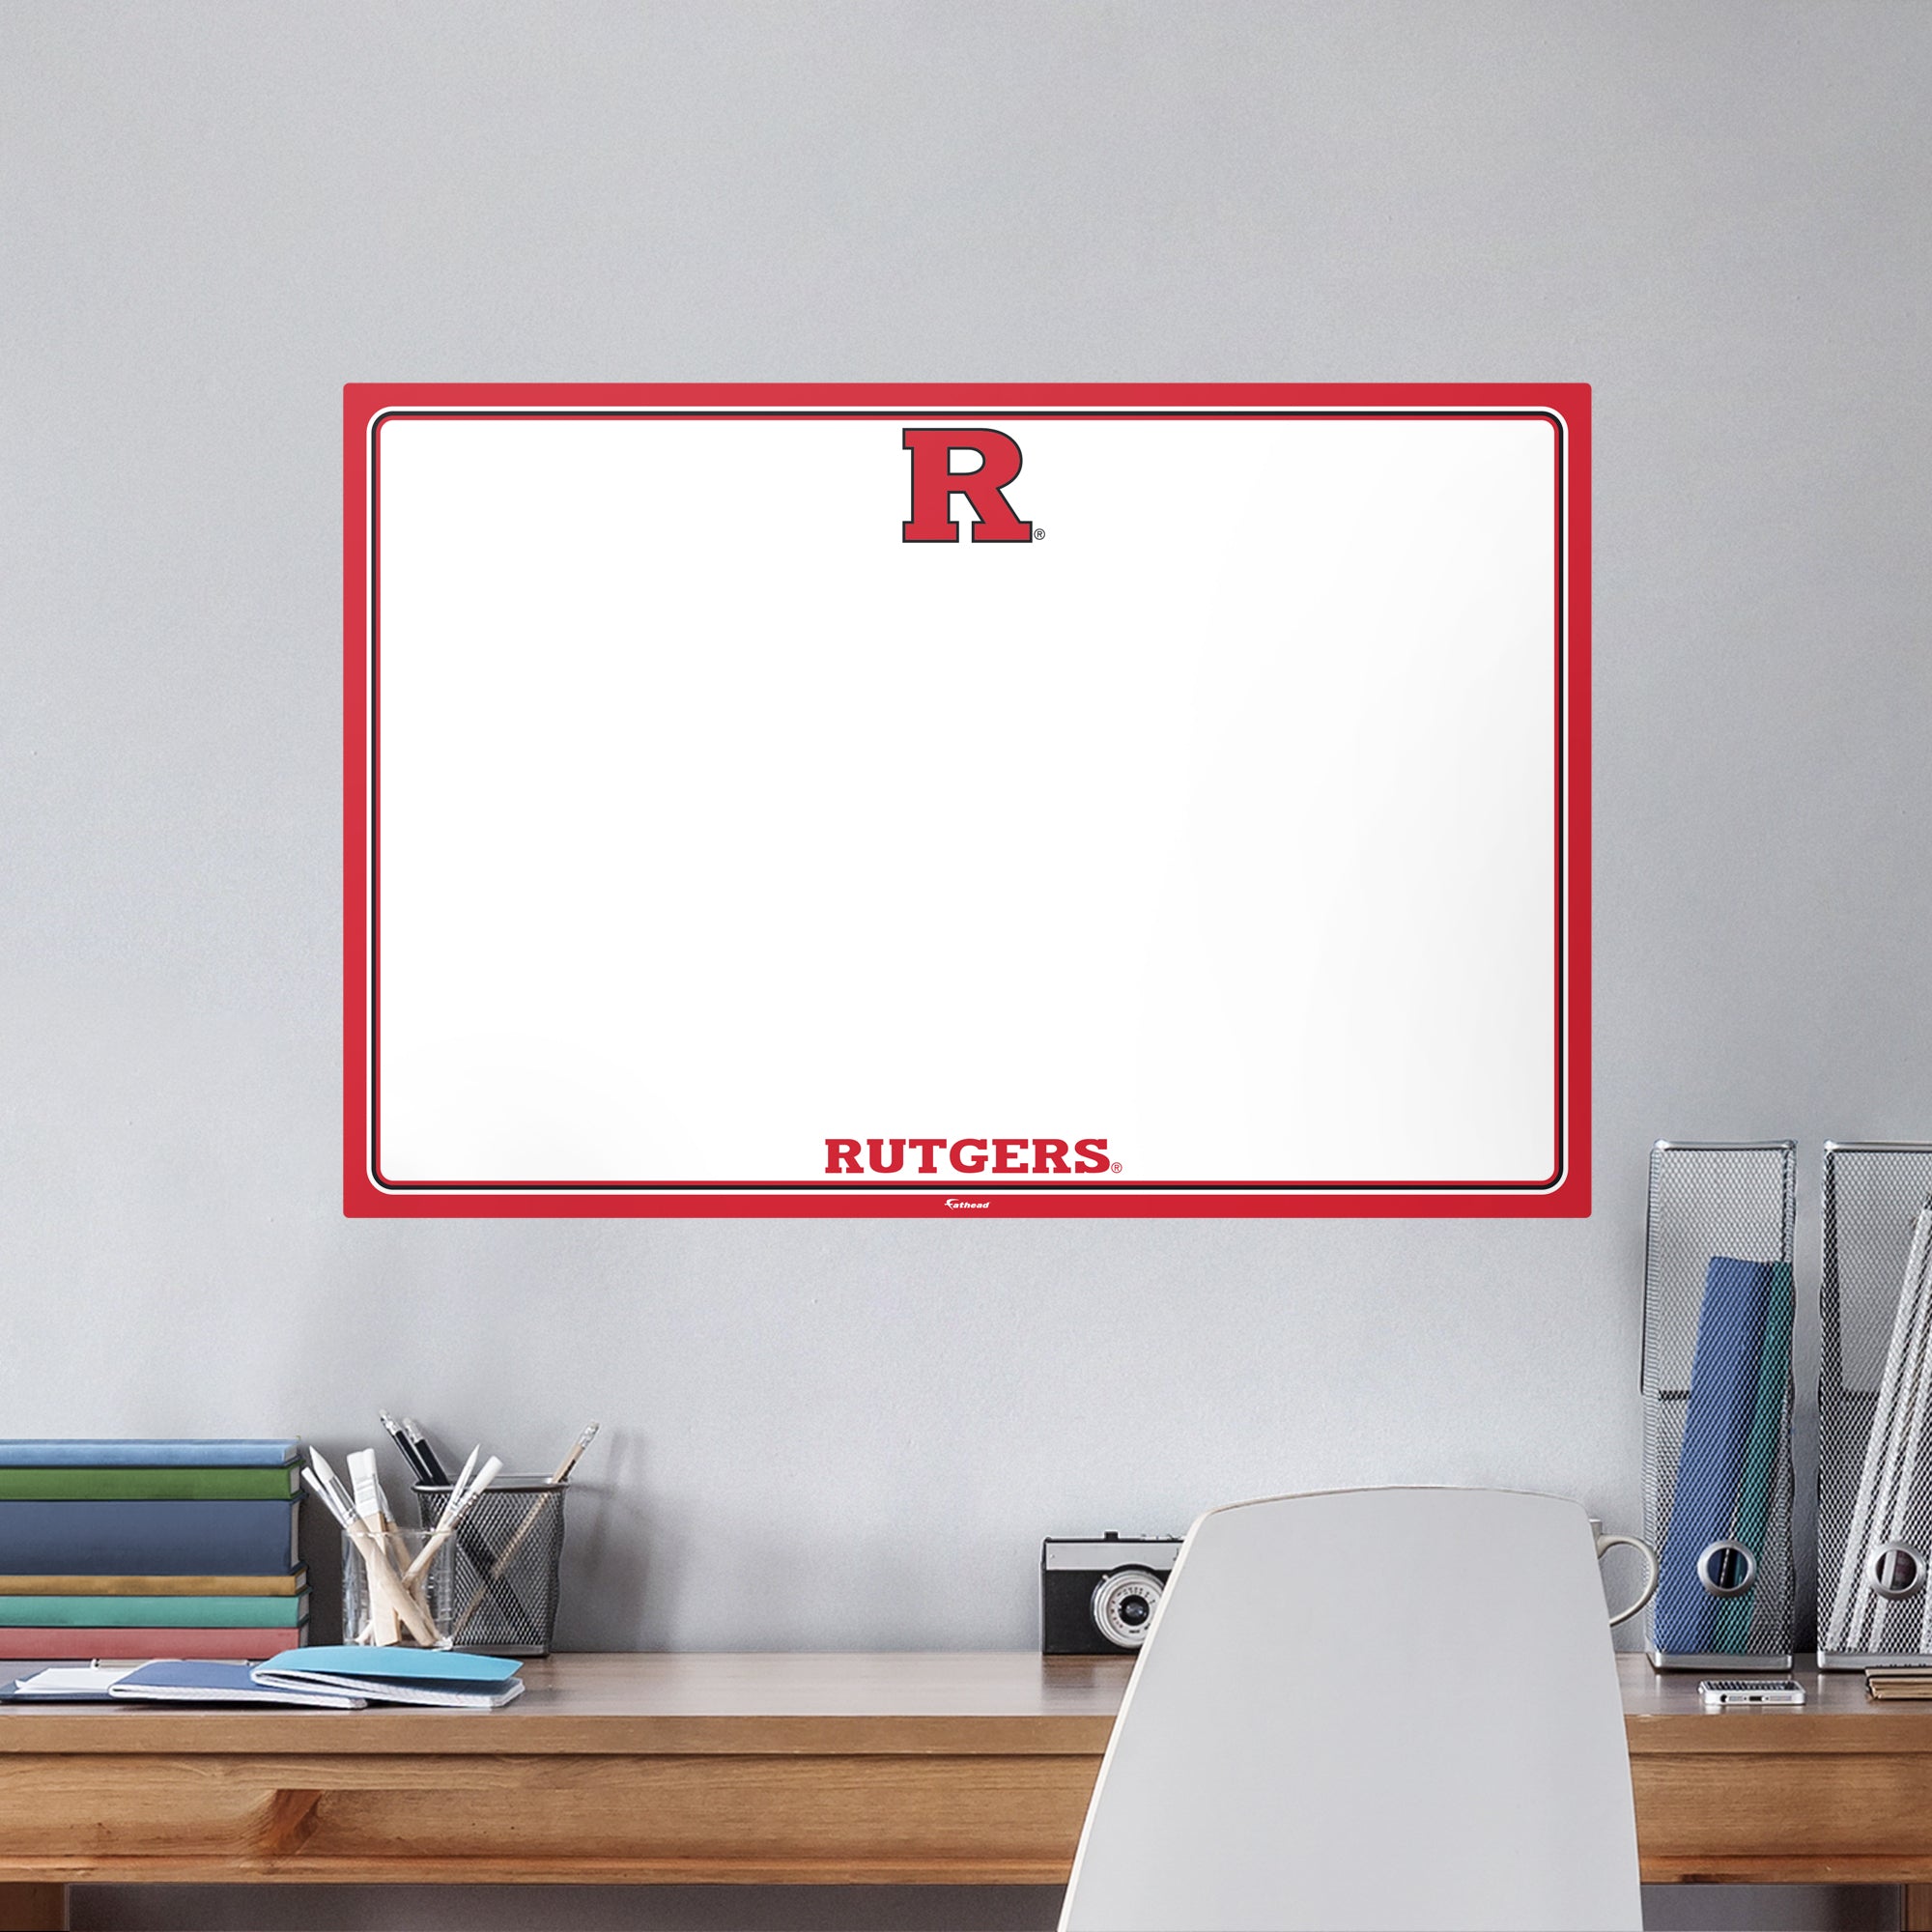 Rutgers Scarlet Knights: Dry Erase Whiteboard - X-Large Officially Licensed NCAA Removable Wall Decal XL by Fathead | Vinyl